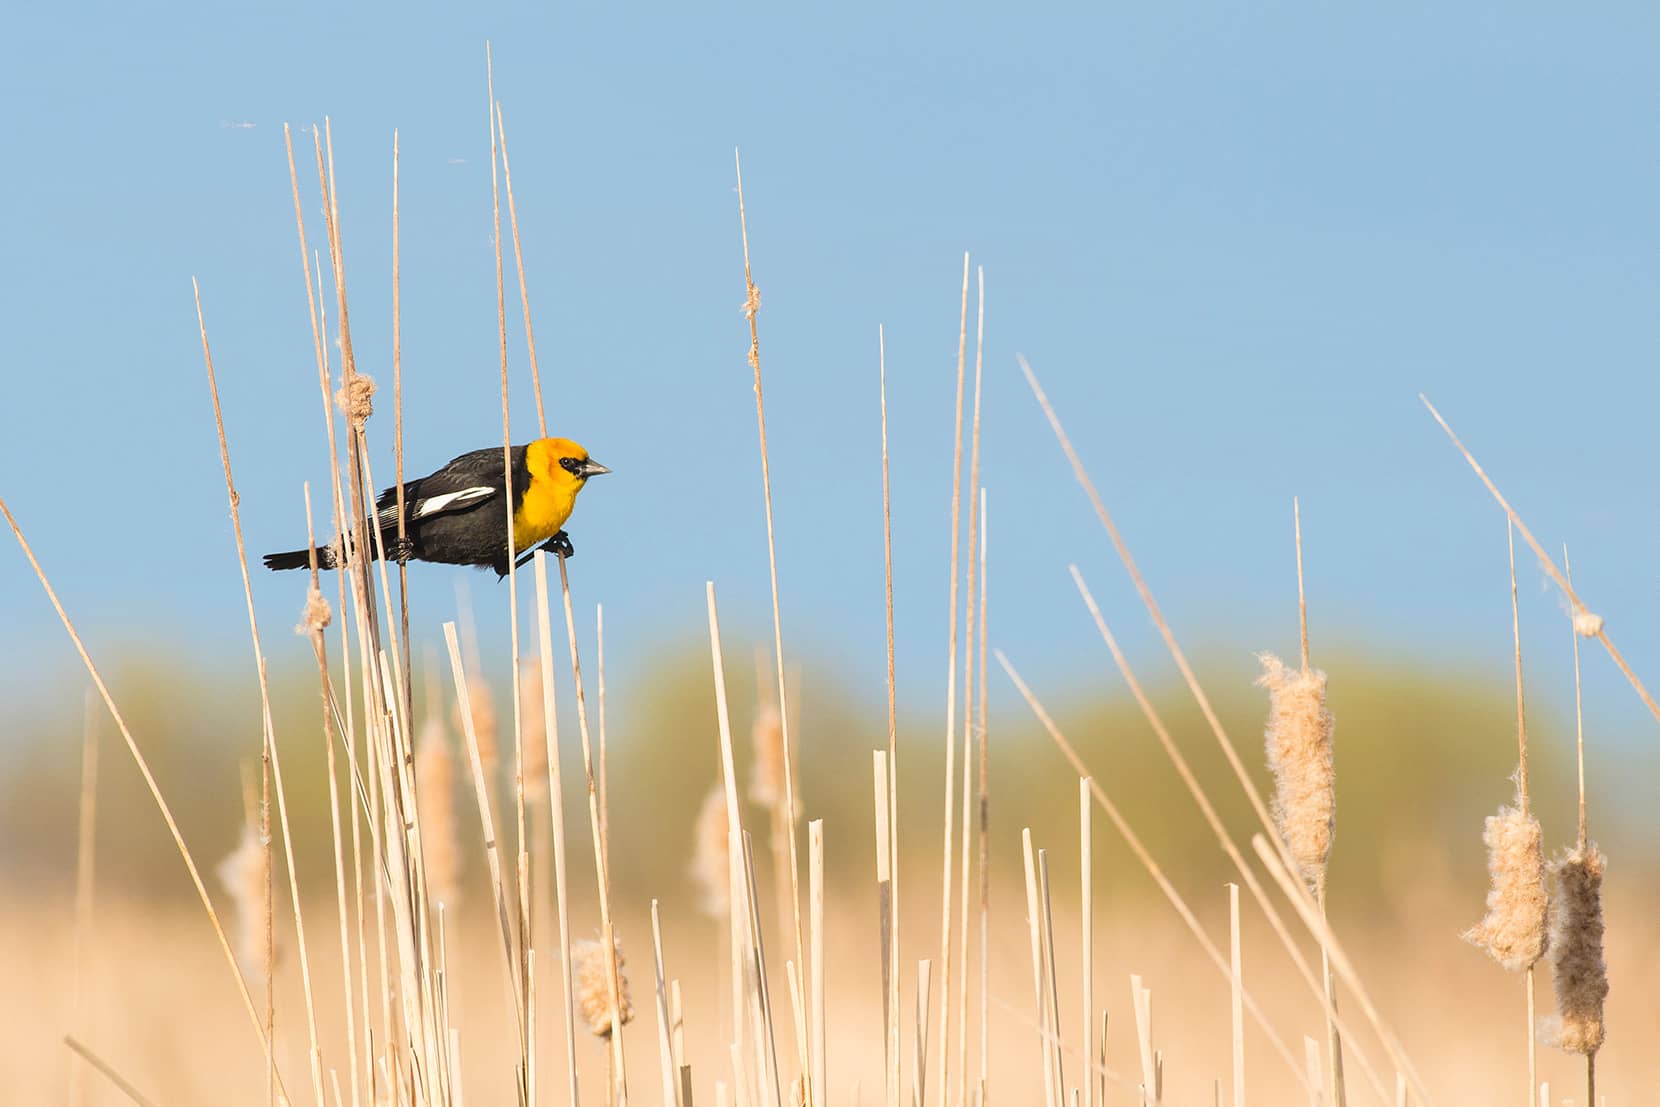 Yellow-headed blackbird perched on 